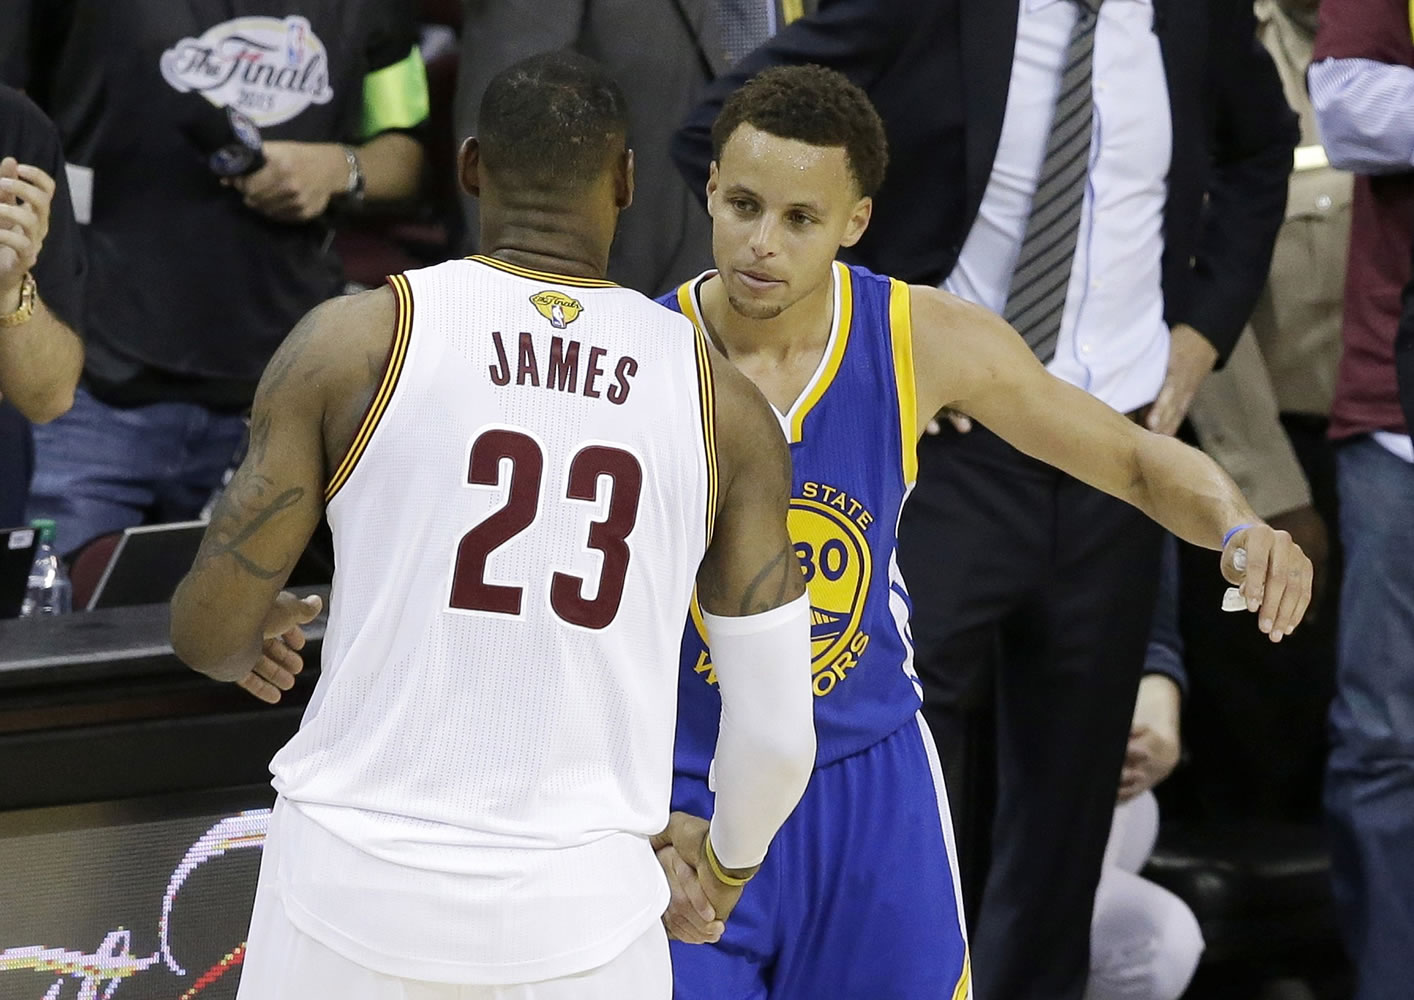 Cleveland Cavaliers forward LeBron James (23) hugs Golden State Warriors guard Stephen Curry (30) during the second half of Game 6 of basketball's NBA Finals in Cleveland, Tuesday, June 16, 2015. The Warriors defeated the Cavaliers 105-97 to win the best-of-seven game series 4-2.